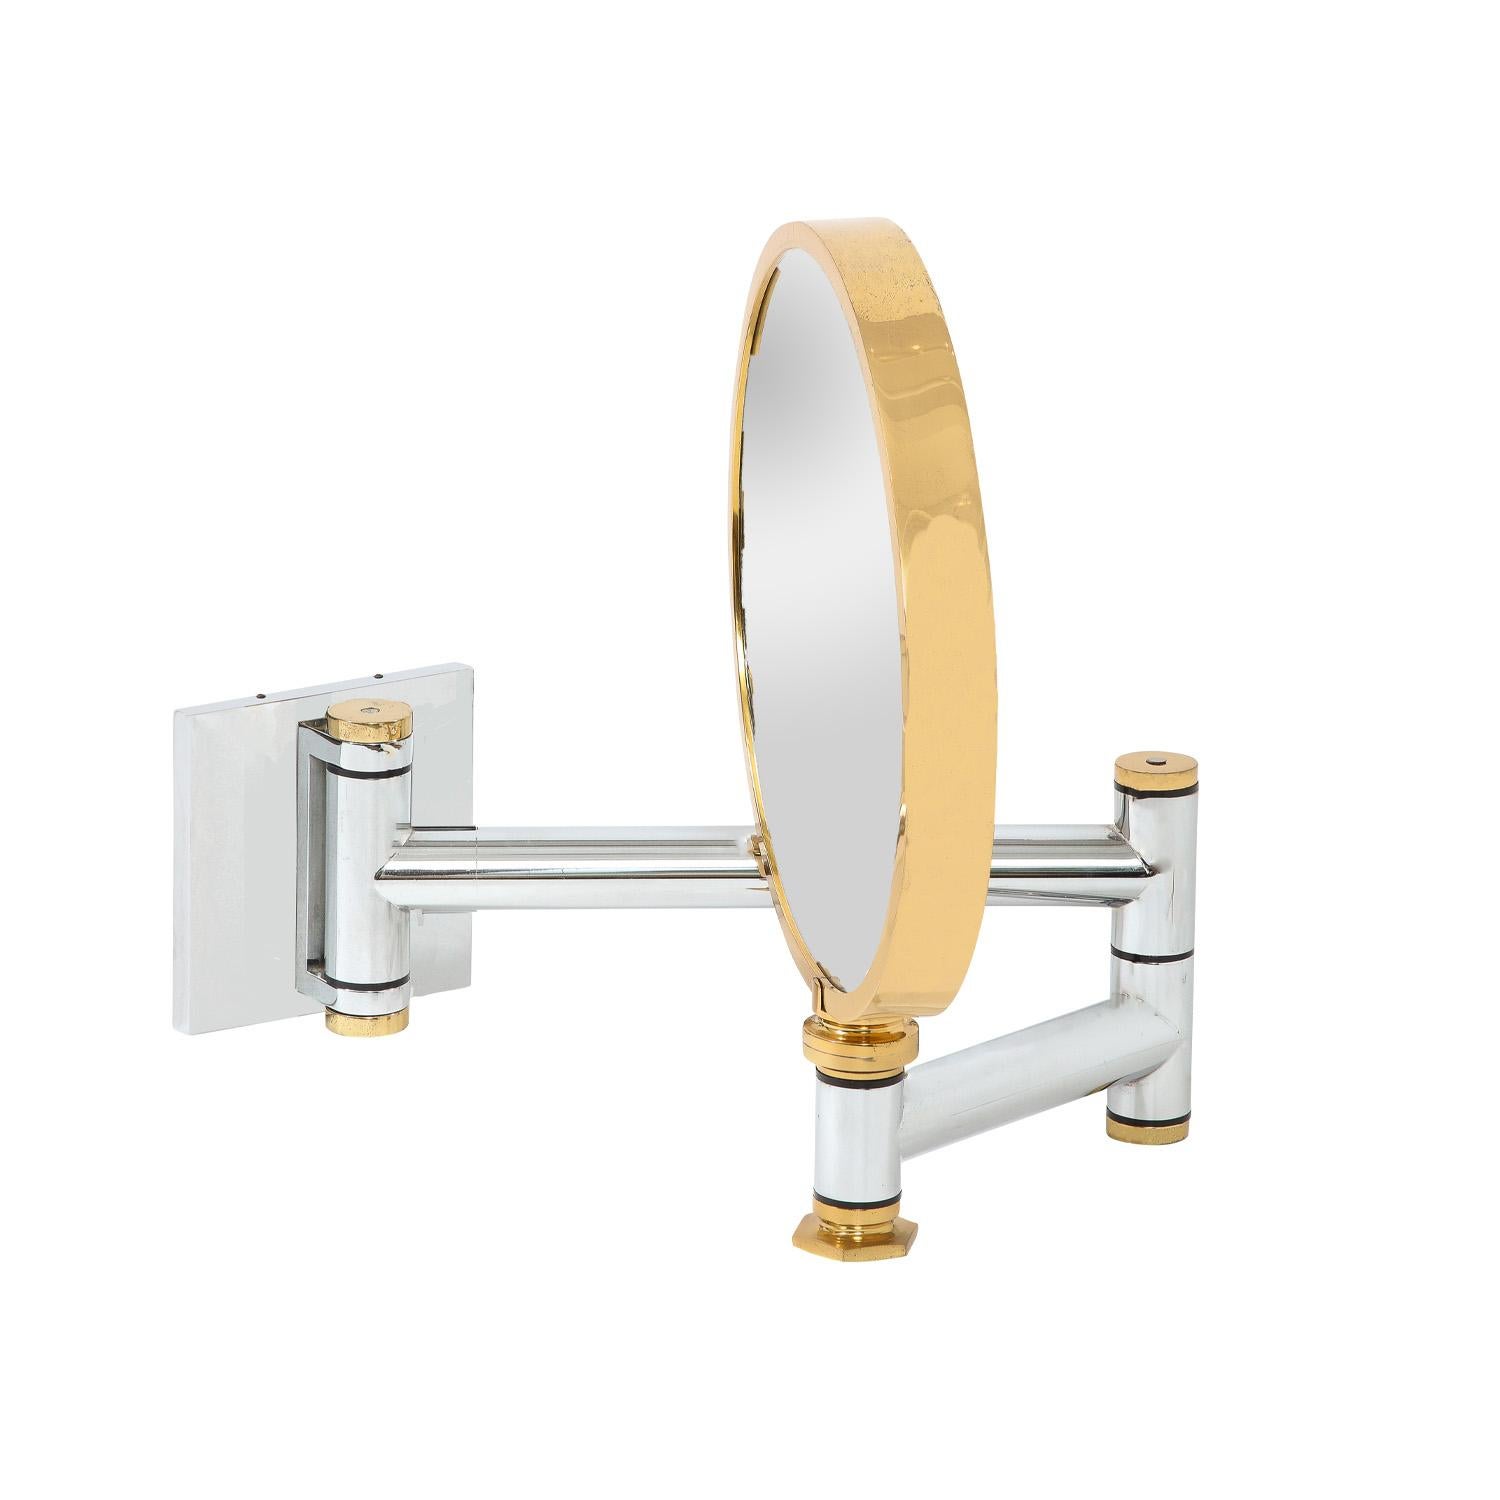 Modern Karl Springer Rare Wall-Mounted Mirror in Polished Chrome and Brass 1980s For Sale